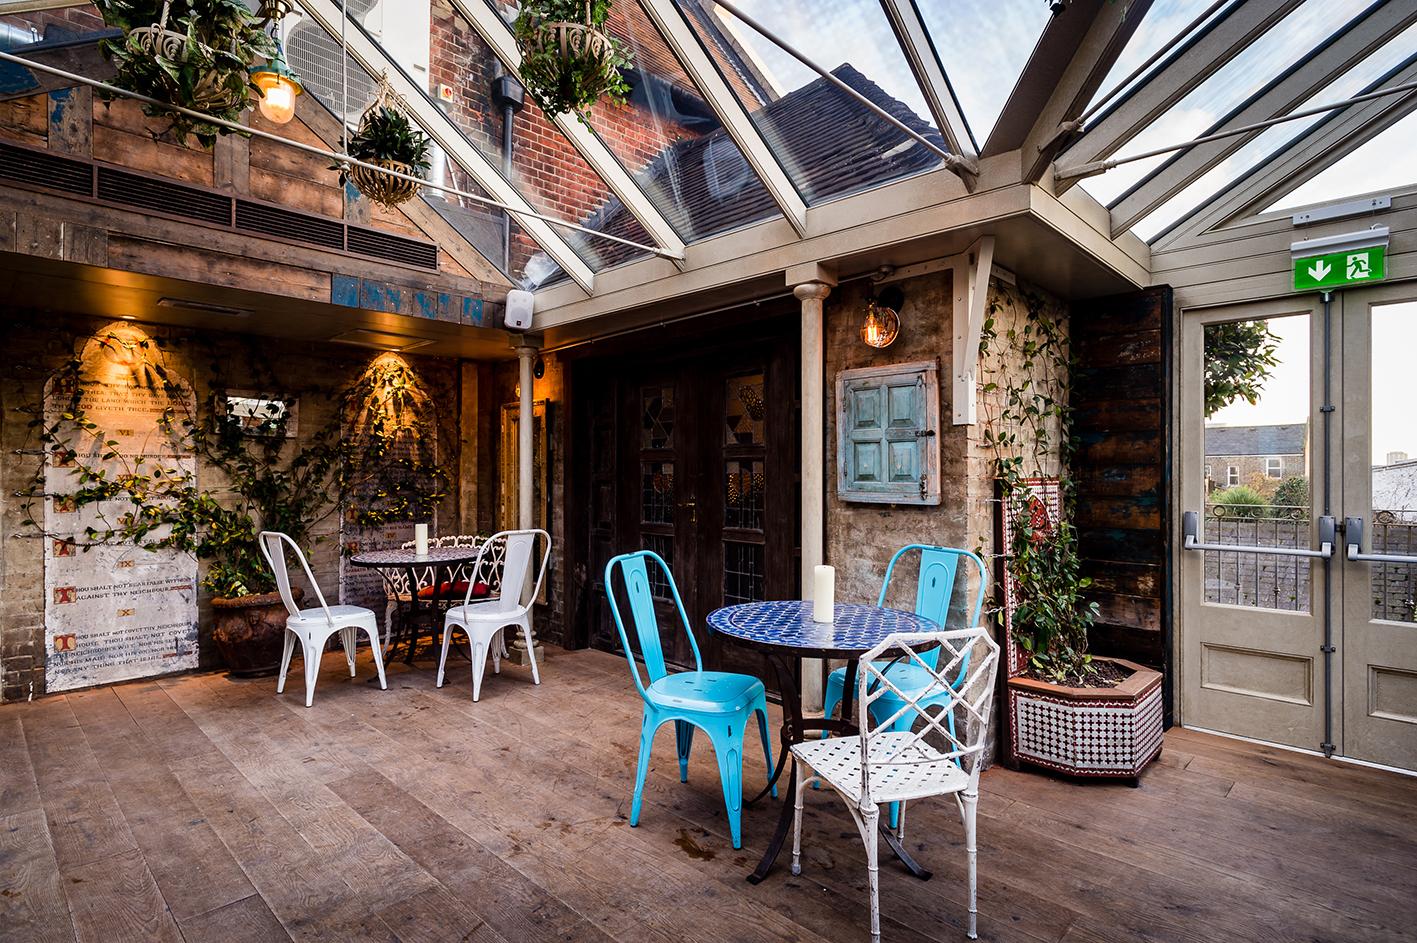 Conservatory, Paradise By Way Of Kensal Green photo #1